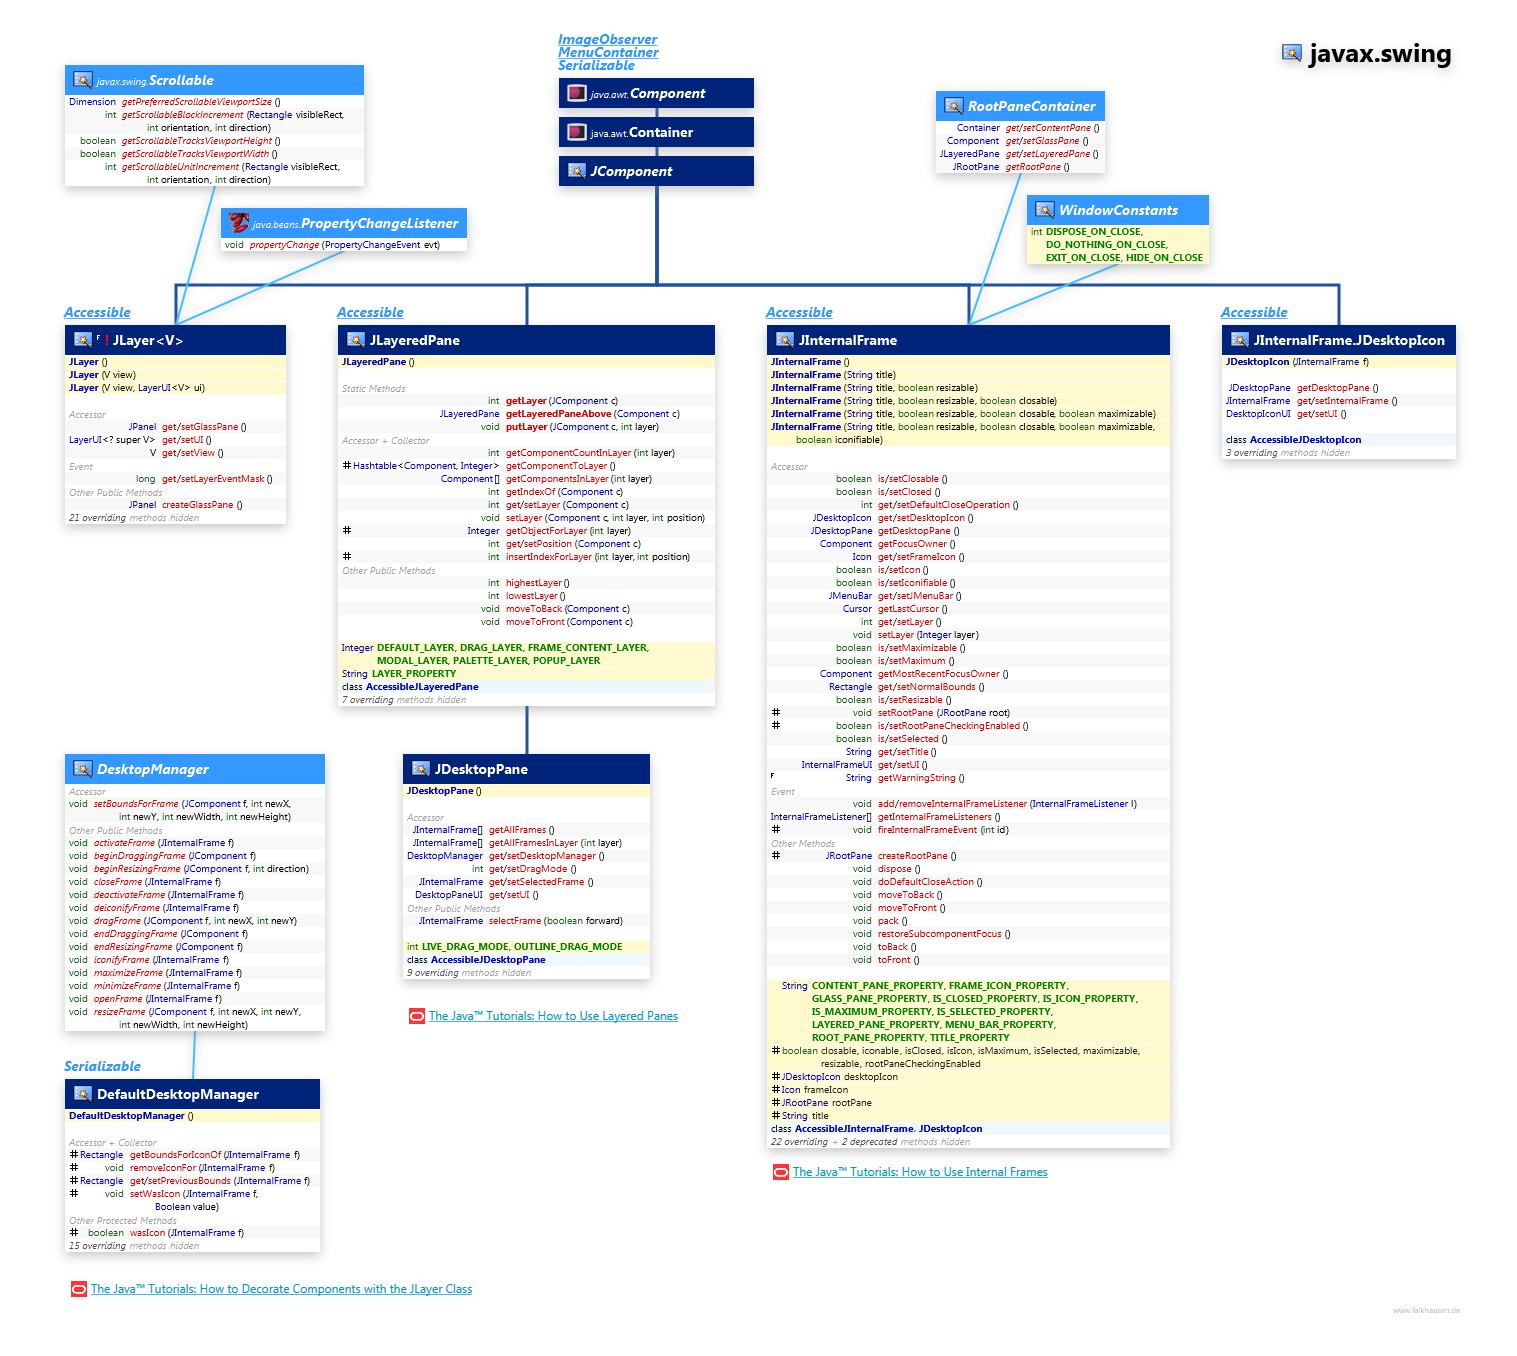 javax.swing Layers class diagram and api documentation for Java 7